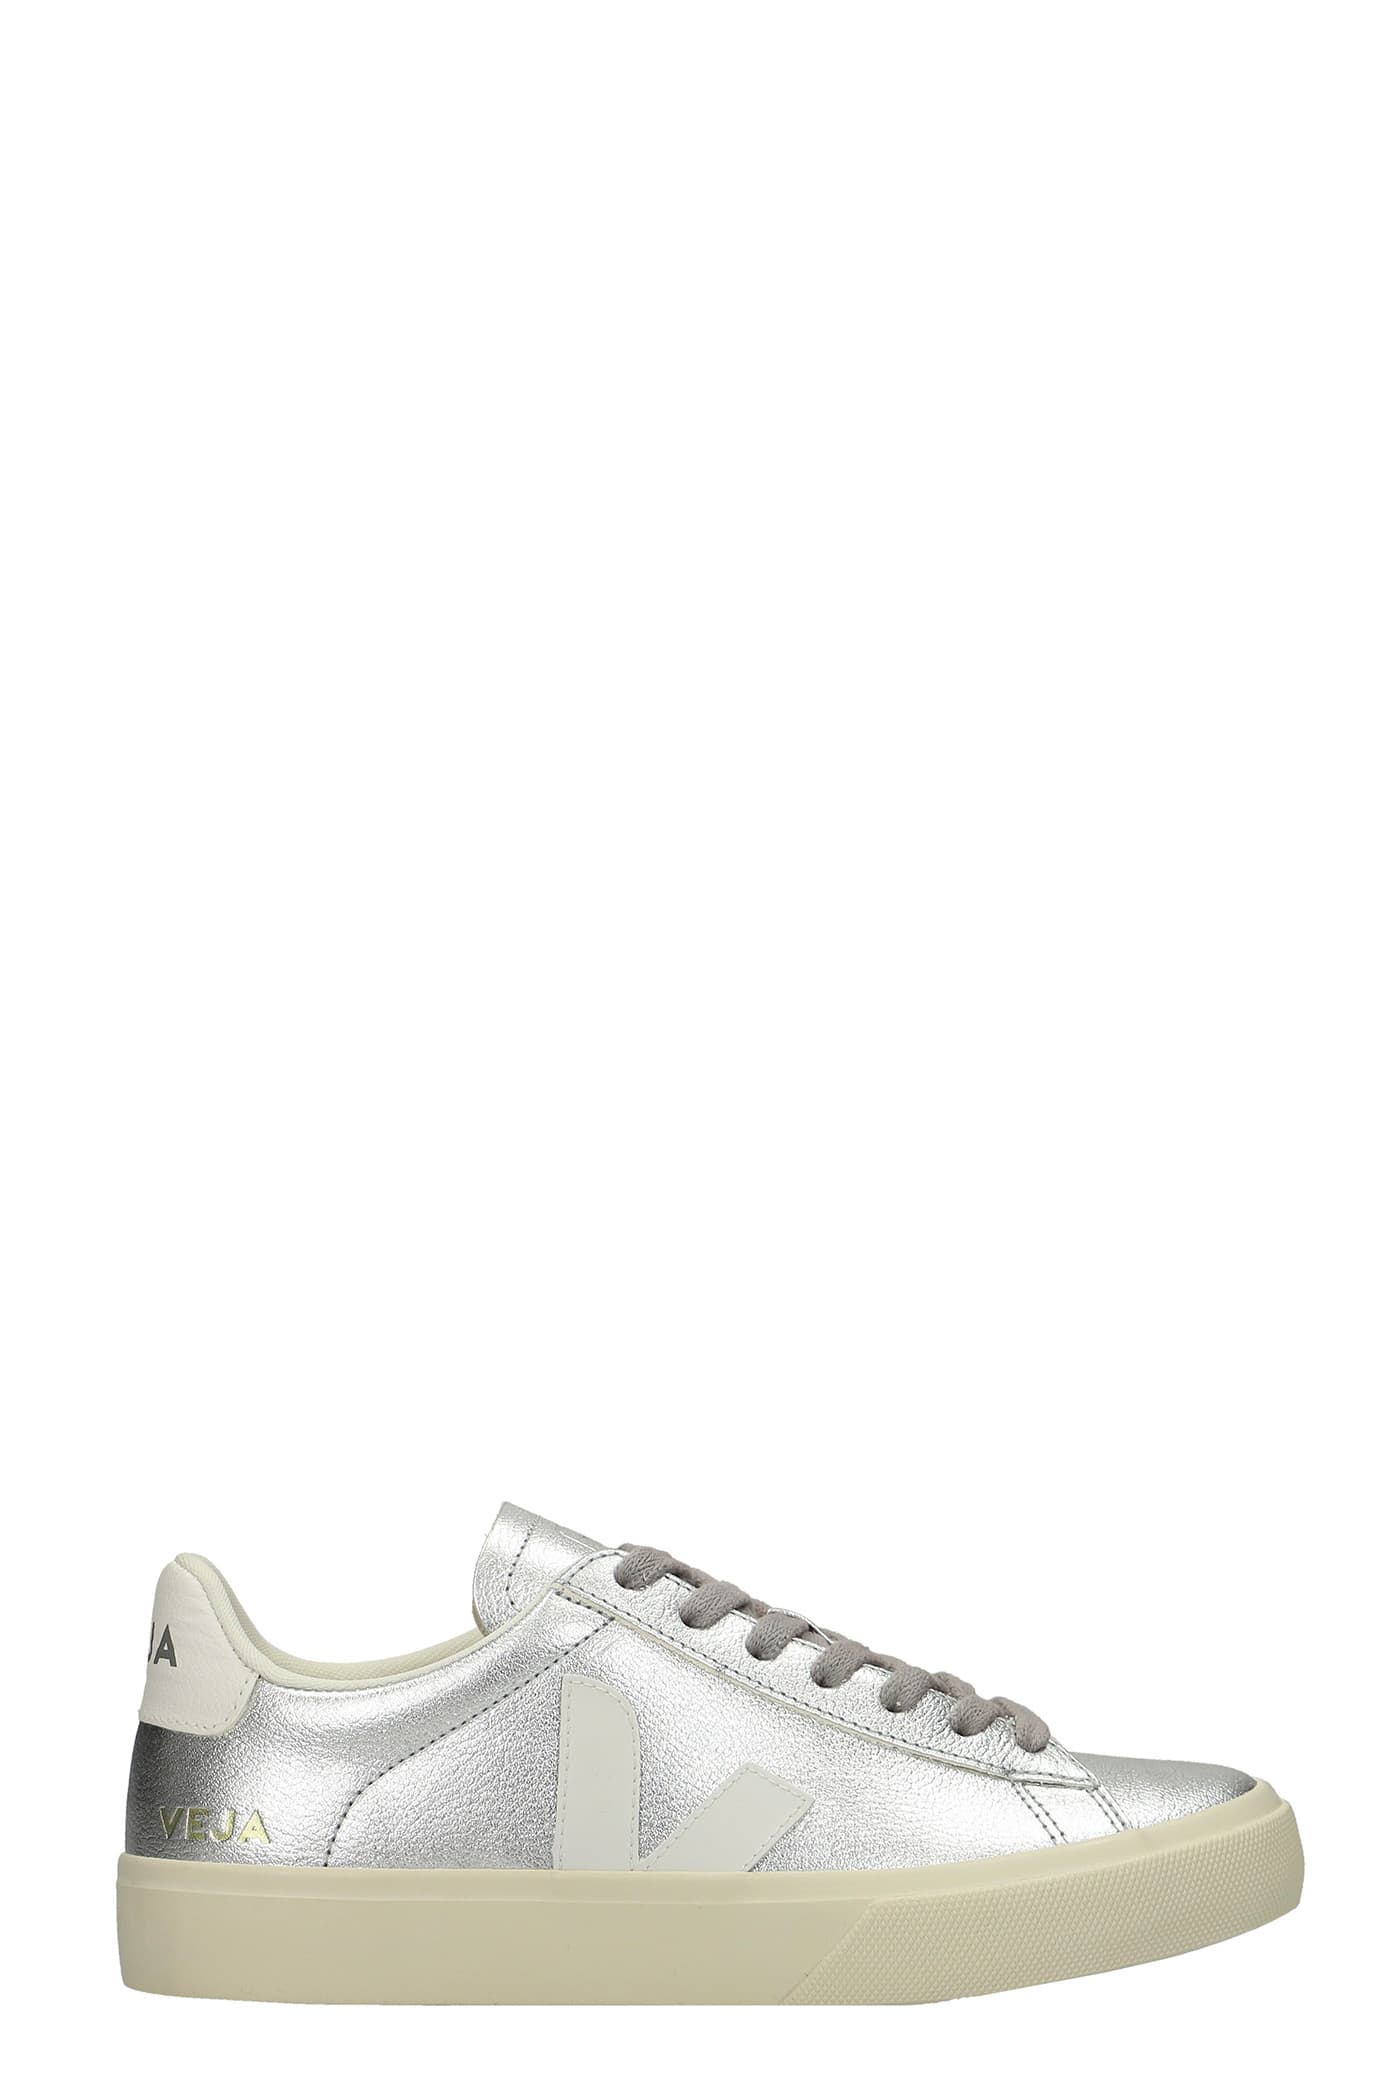 Veja Campo Sneakers In Silver Leather